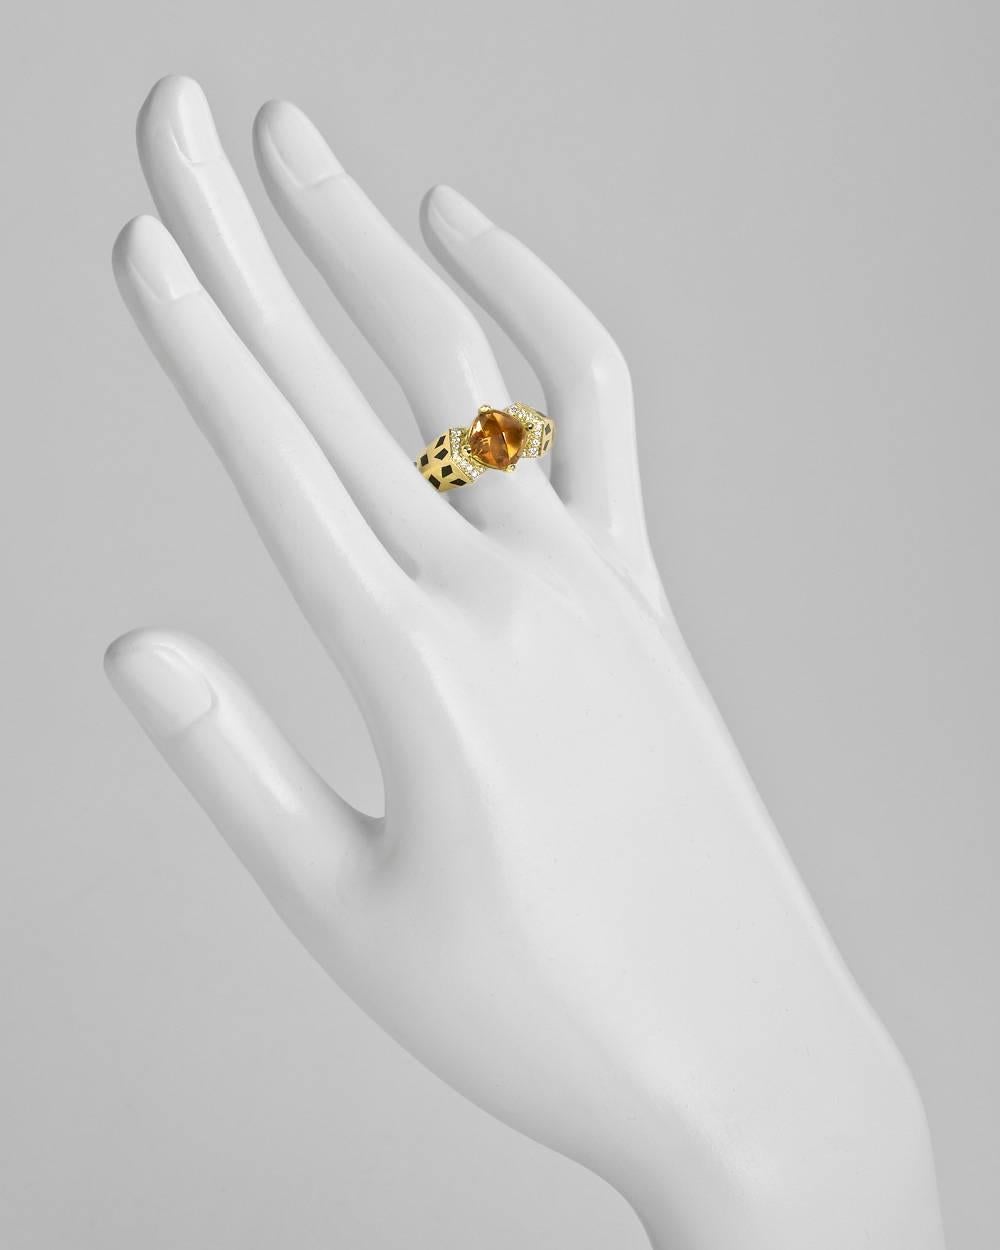 Panthère de Cartier ring, centering a sugarloaf cabochon-cut citrine flanked by round-brilliant-cut diamond accents, in 18k yellow gold with black enamel spots, numbered '10653B' and signed Cartier. Twenty diamonds weighing approximately 0.50 total